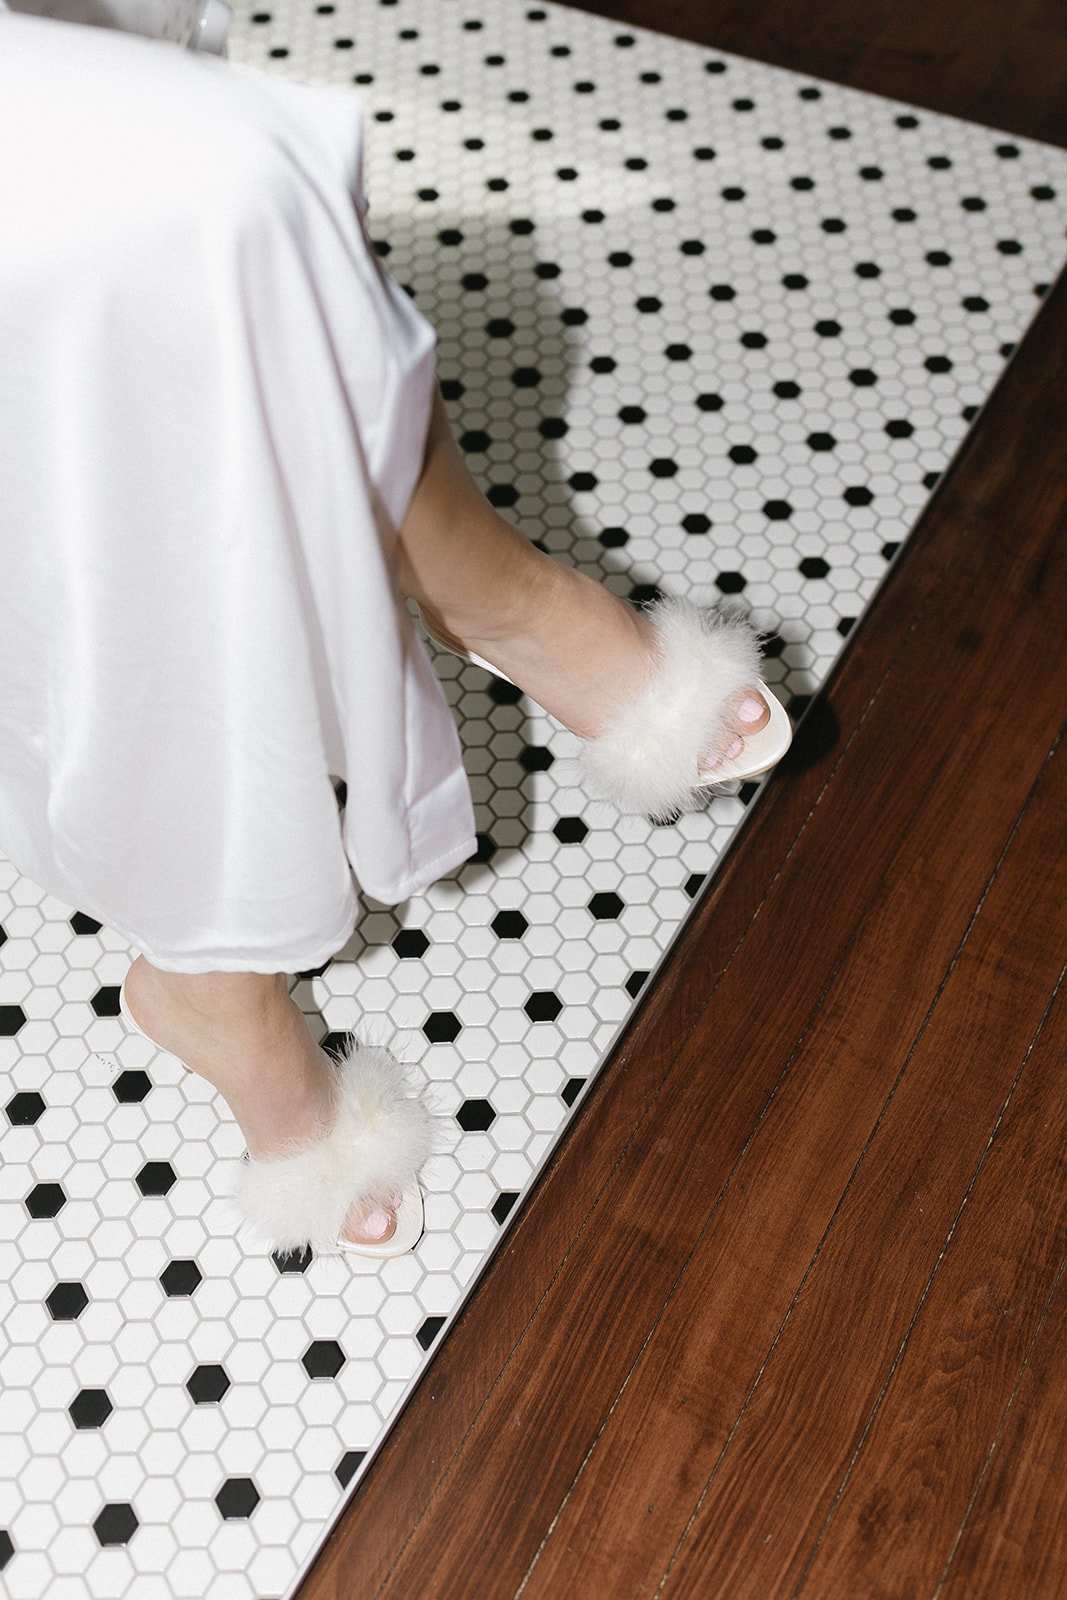 Chic Bridal Inspiration & Getting Ready Photos Perfect for the Fashion-Forward Bride. Bride wearing feather heals by Ereybe Wedding Shoes.